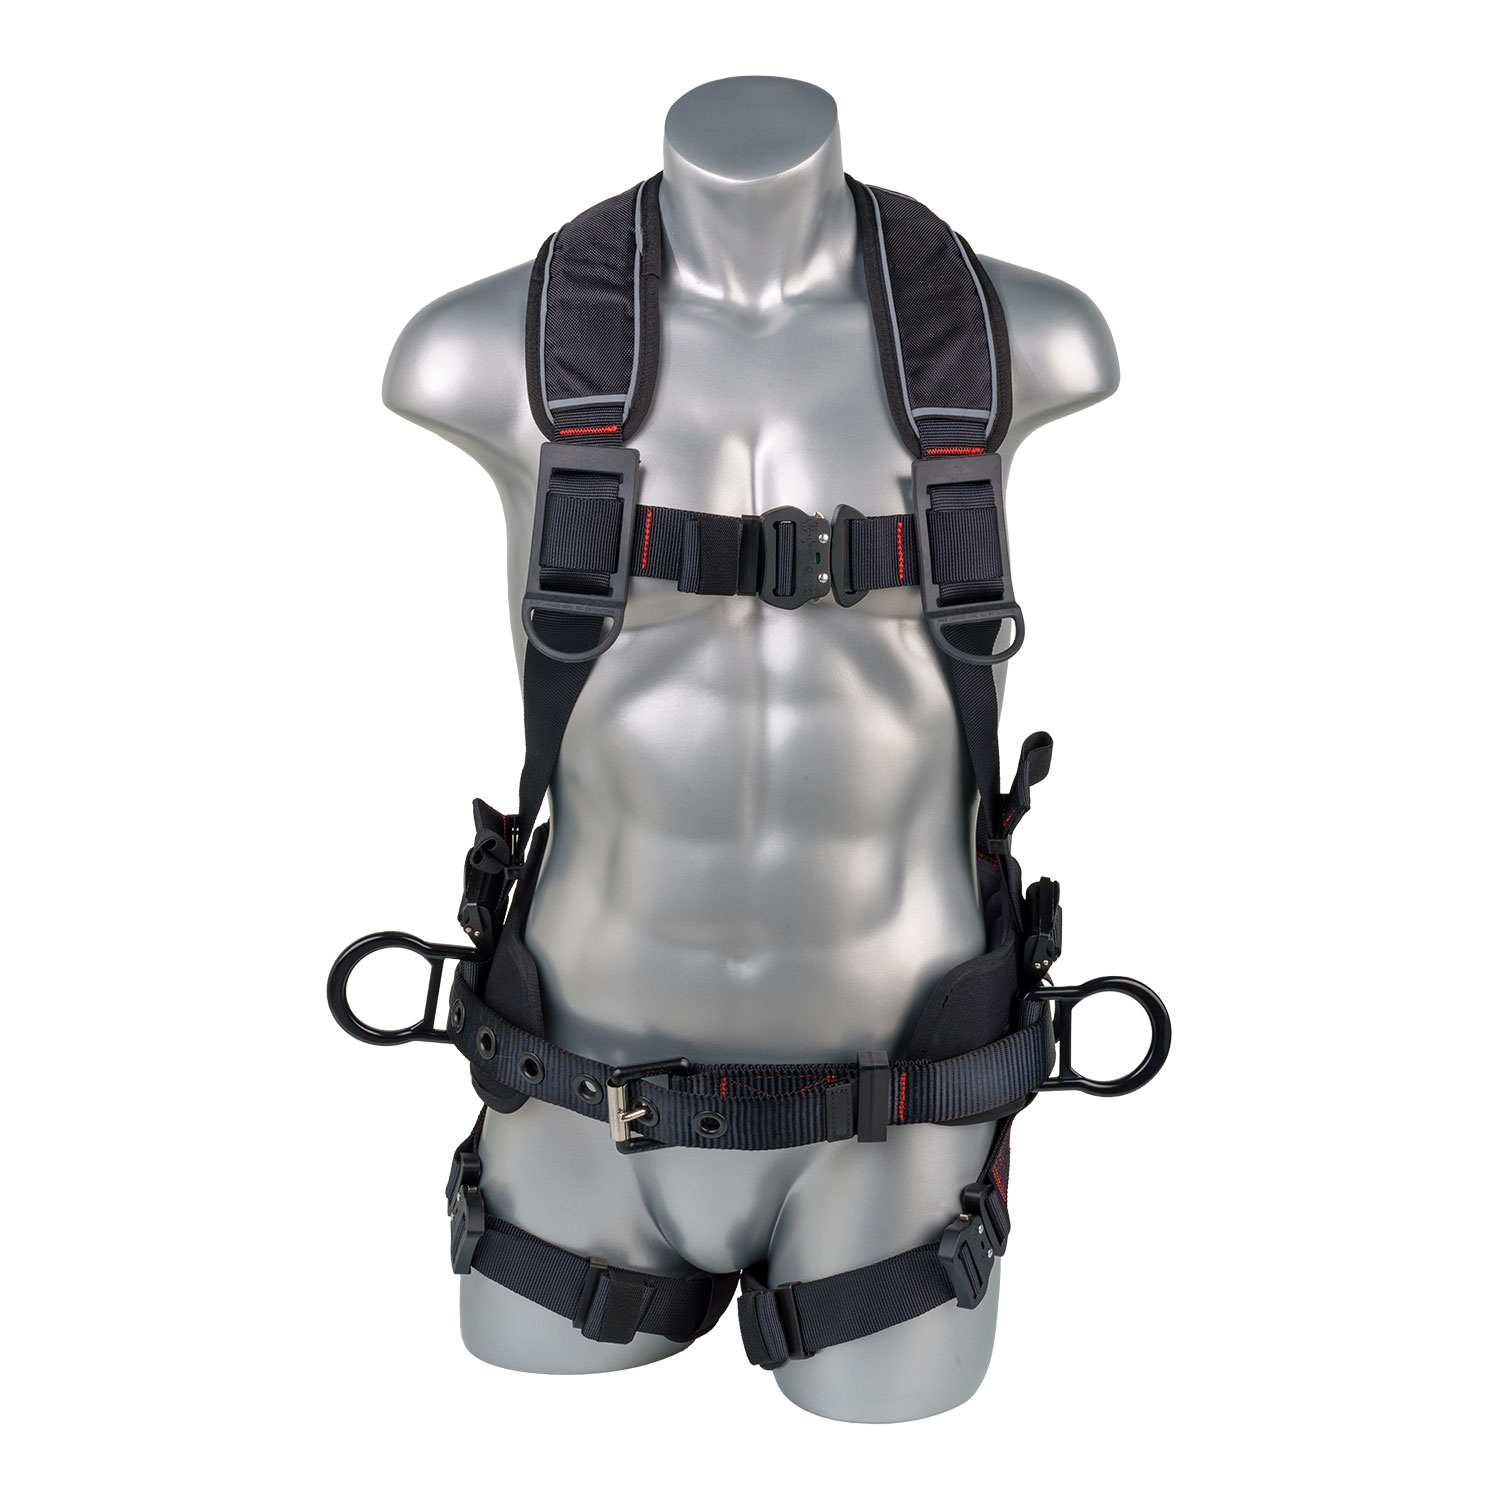 Harness 5pt. Back Padded, QCB Chest, Tongue & Buckle Leg Straps, Back/Side  D-Rings, Positioning Belt. Variable Colors. – Palmer Safety